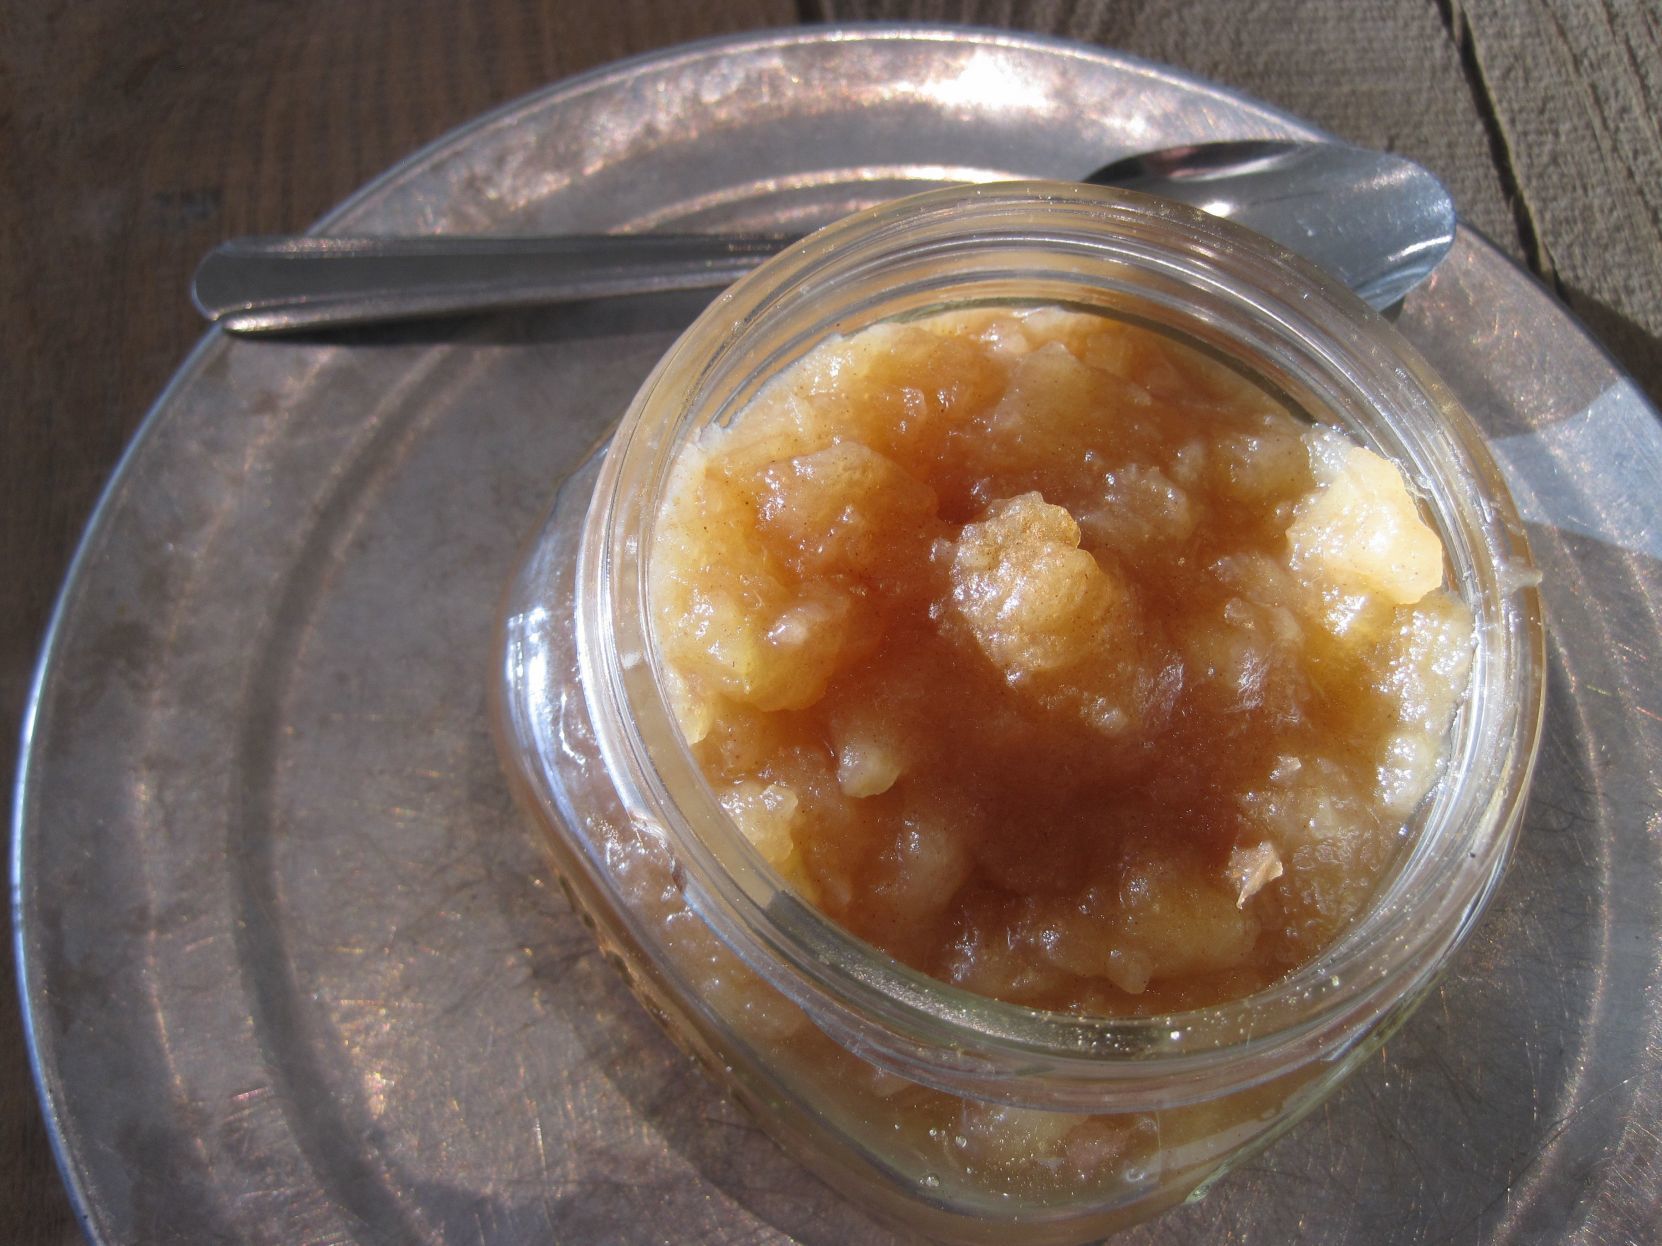 Special Request Stackeds applesauce is chunky, lightly caramelized picture